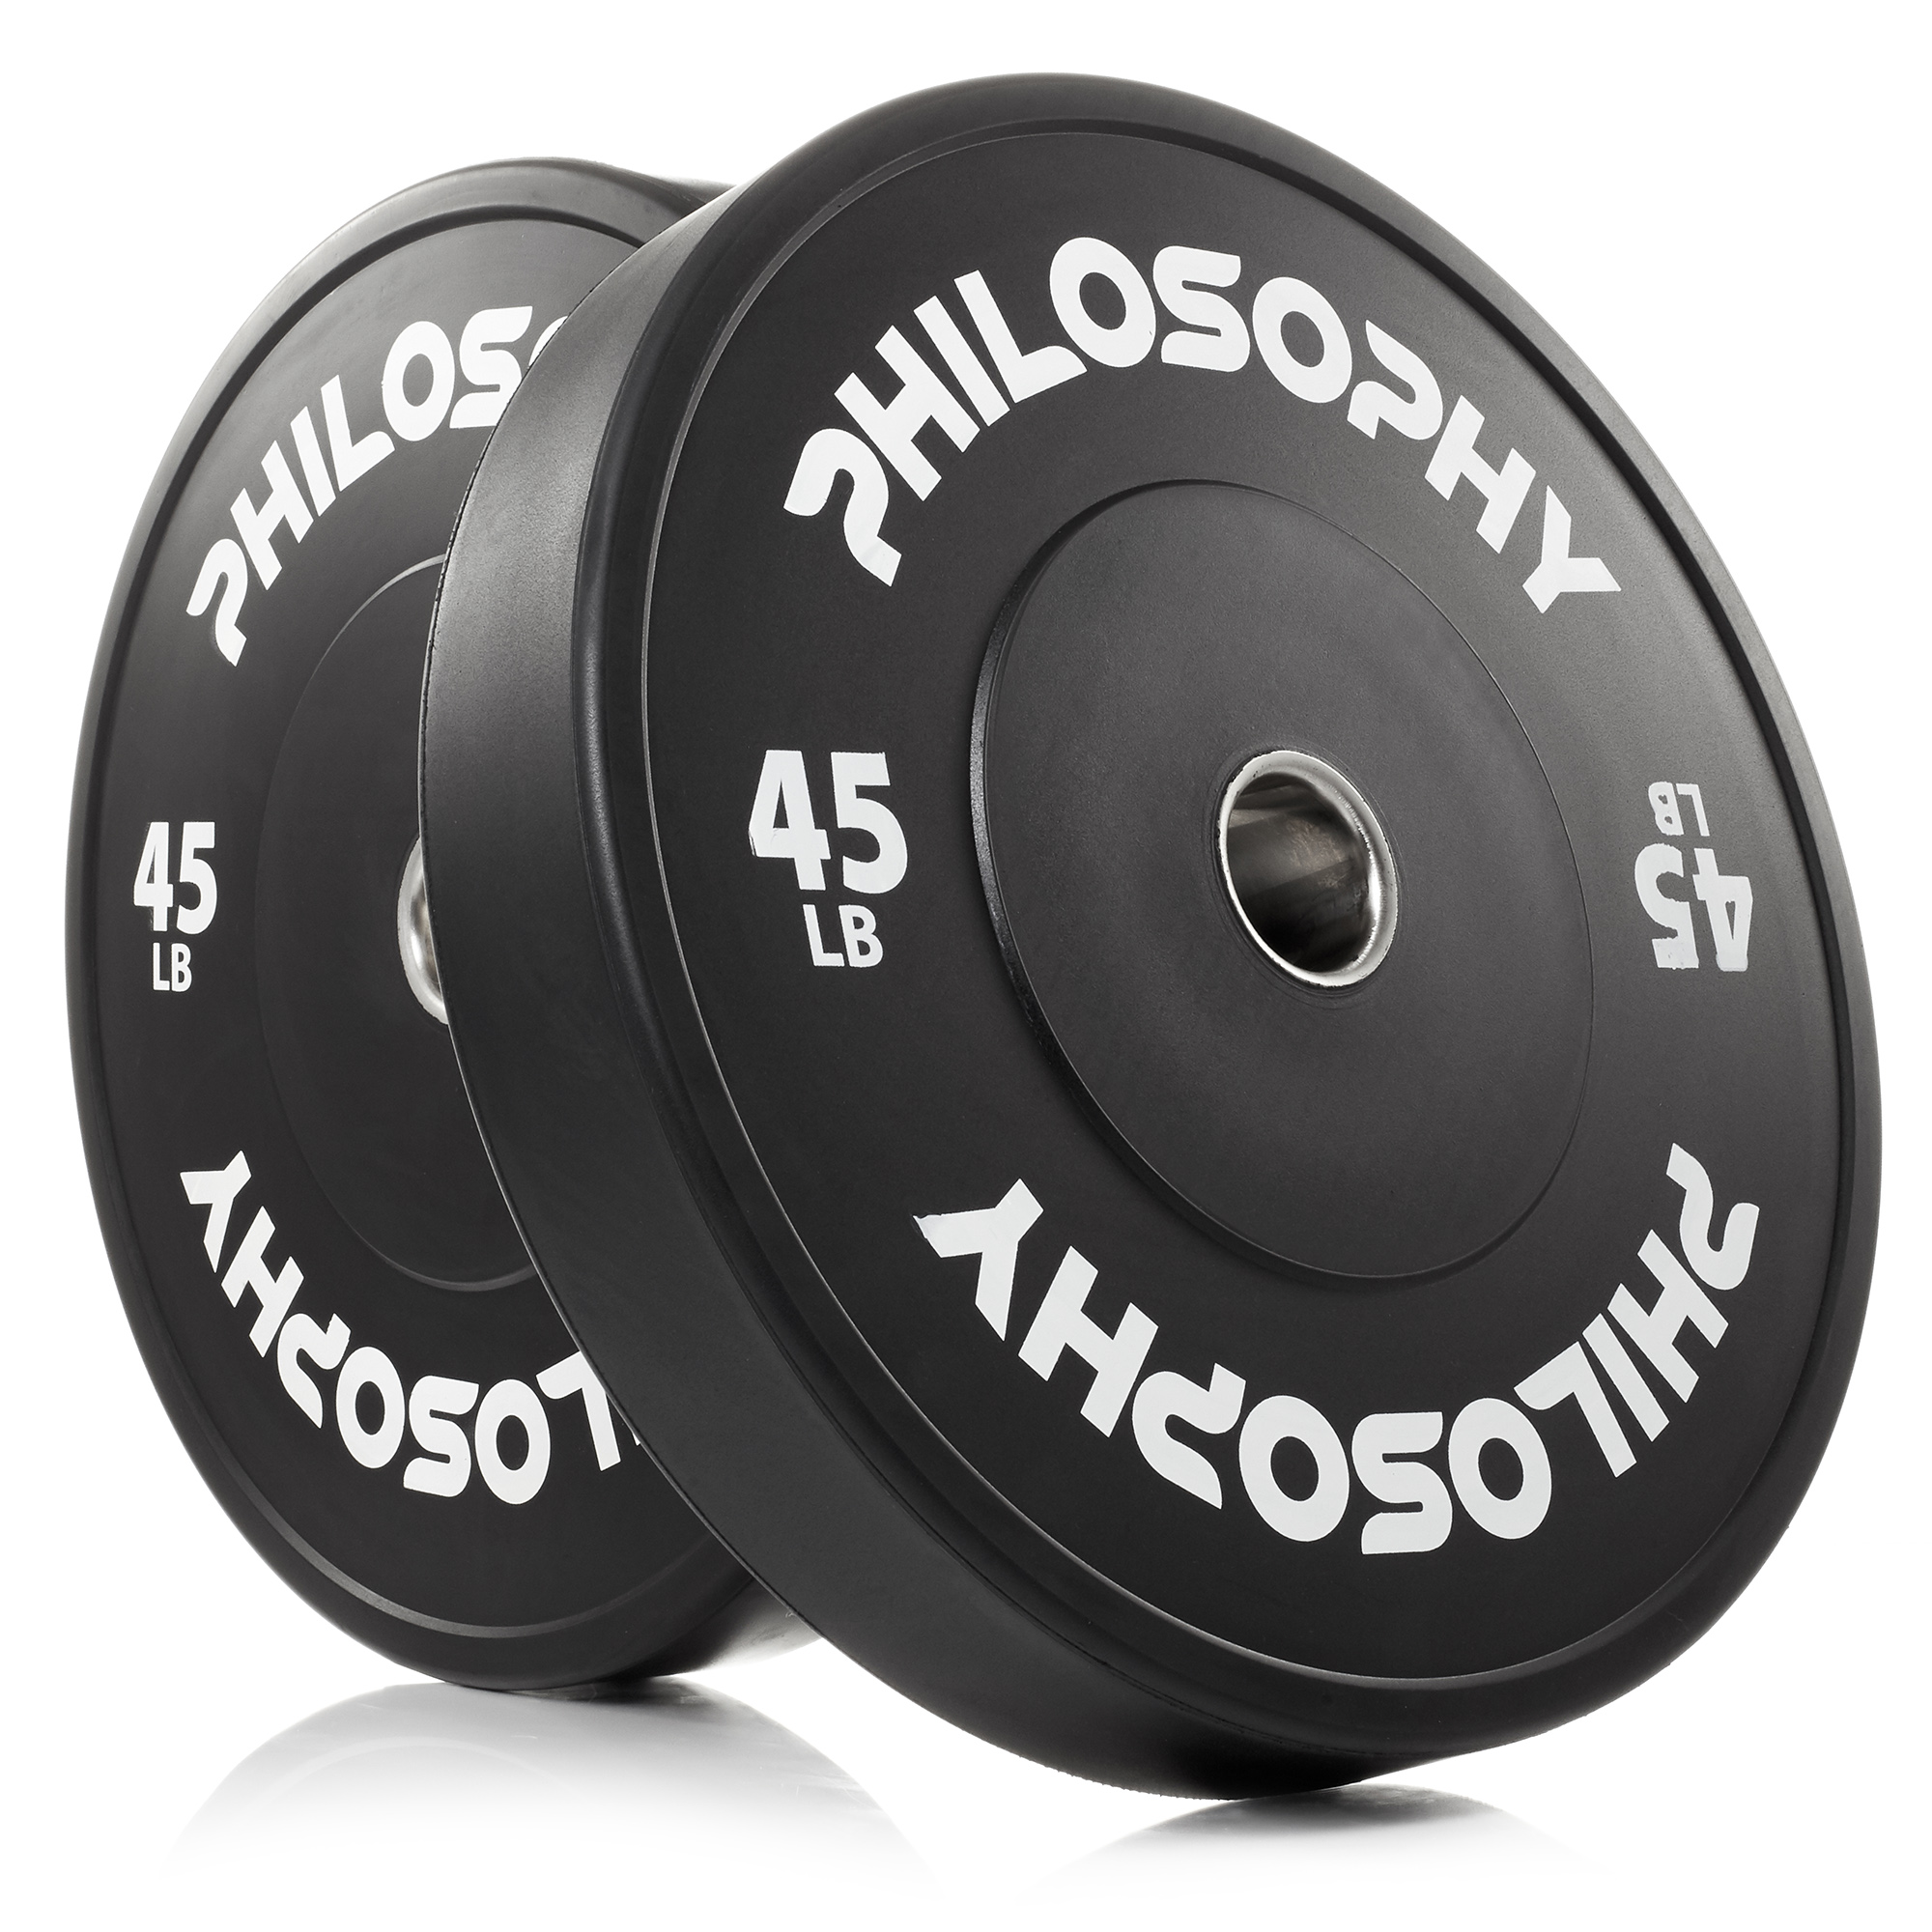 Philosophy Gym Set of 2 Olympic 2-Inch Rubber Bumper Plates (45 LB each) Black